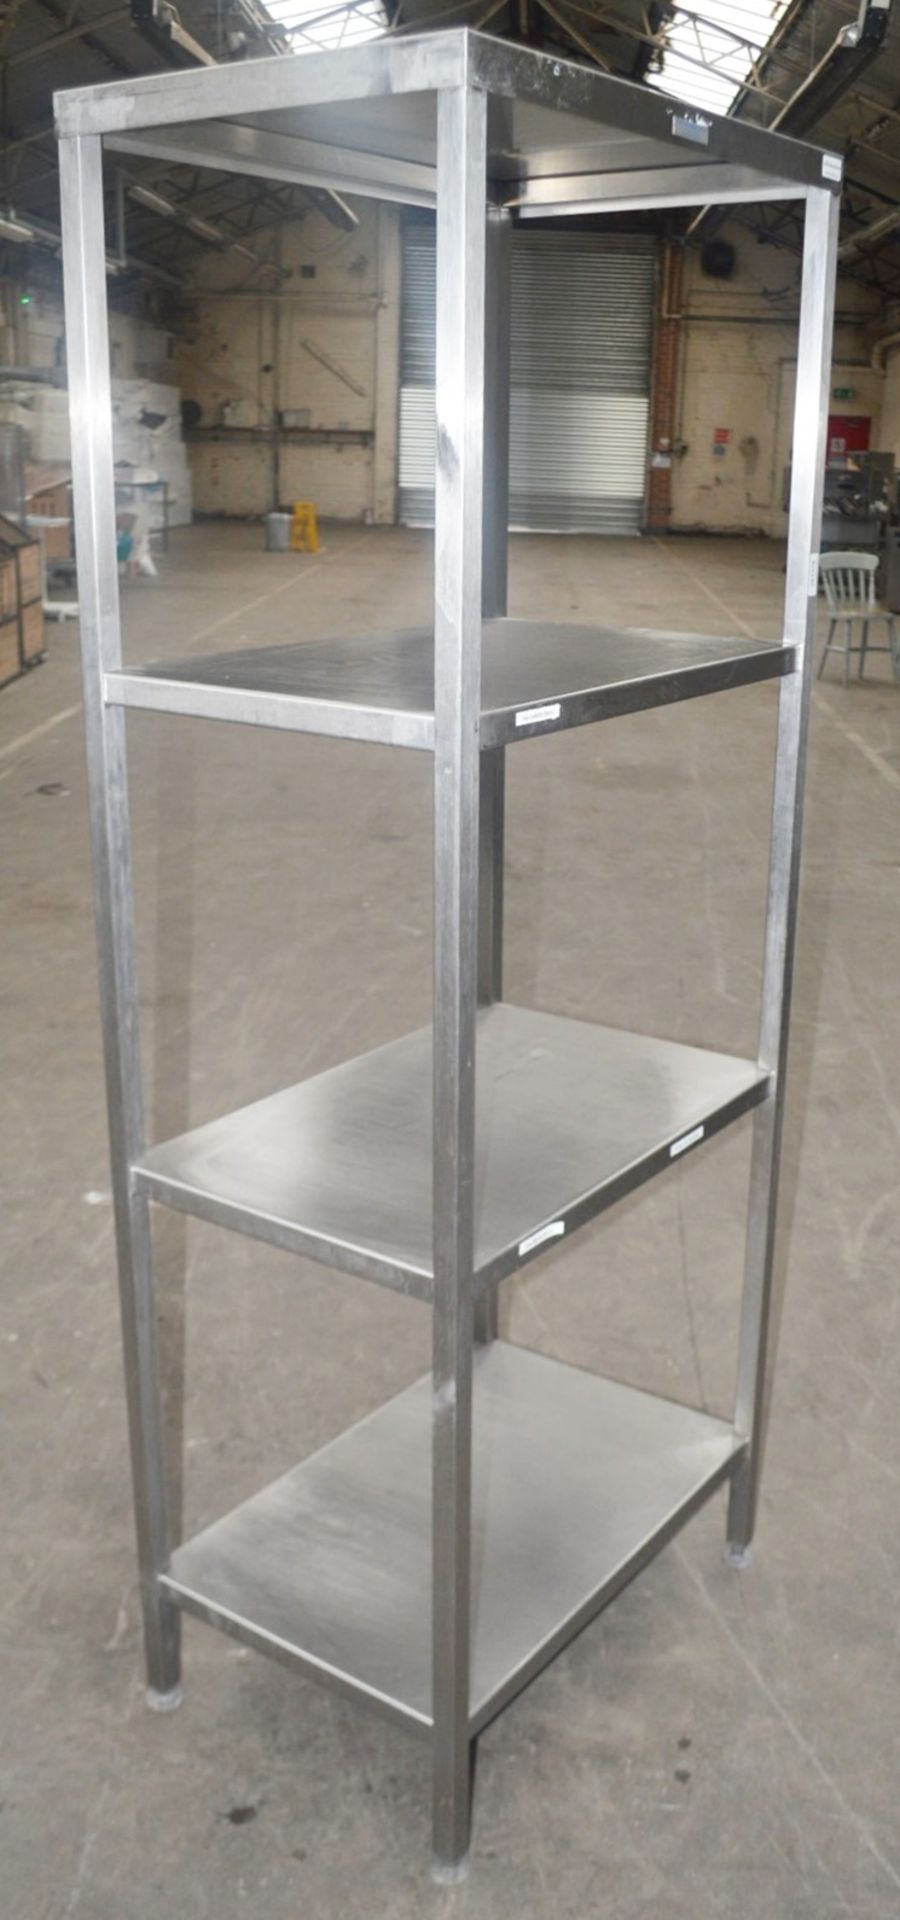 1 x Stainless Steel Commercial Kitchen 4-Tier Shelving Unit - Dimensions: H188 x W74 x D49cm - - Image 2 of 4